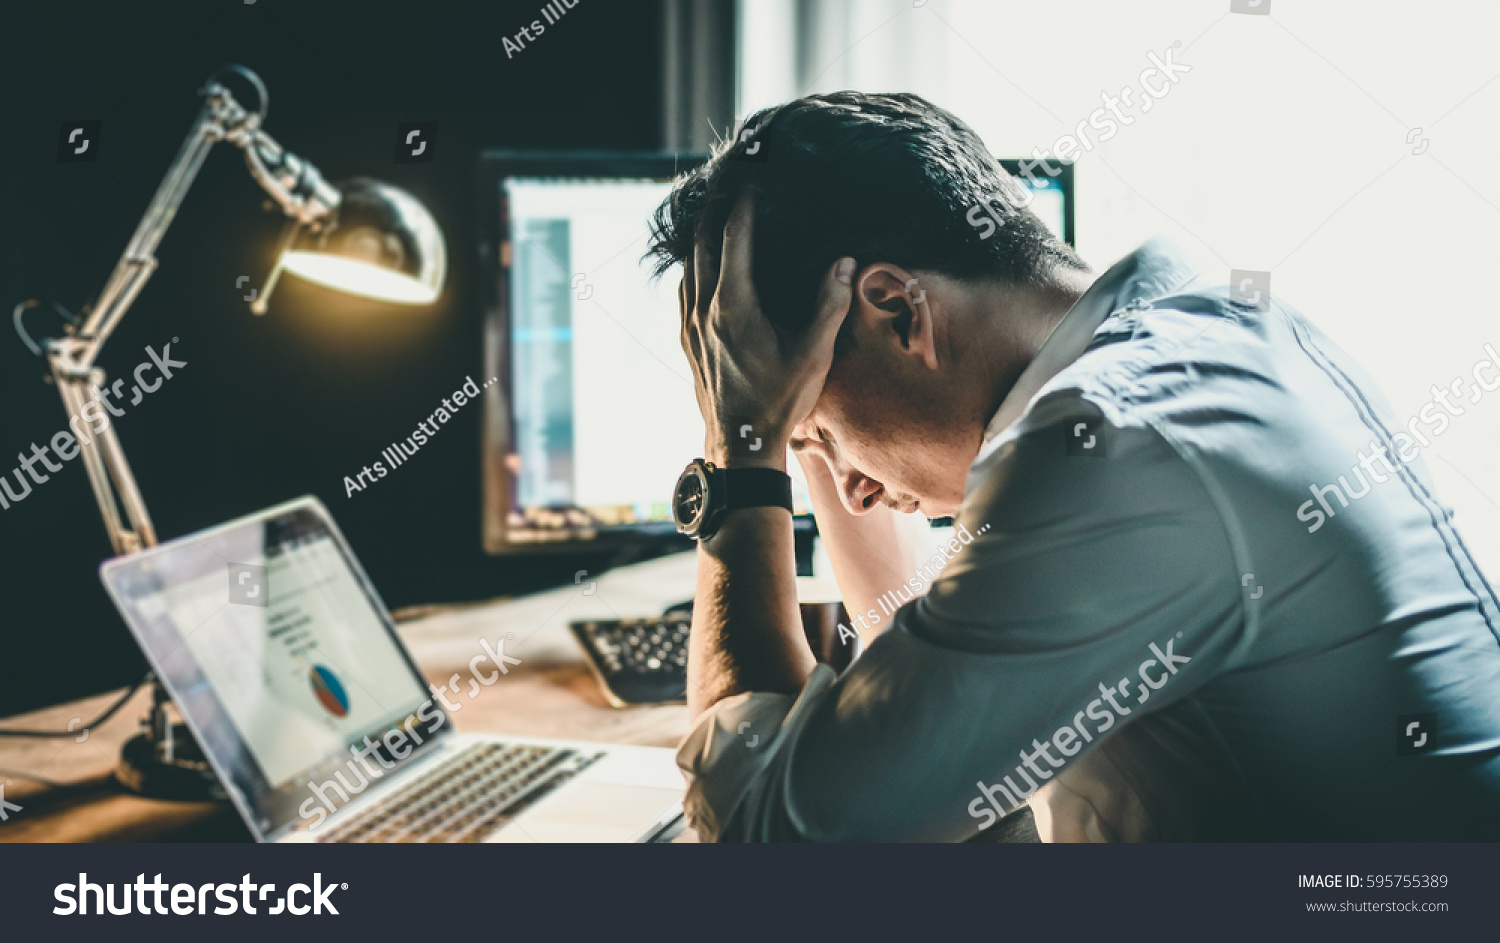 Tired and worried business man at workplace in office holding his head on hands after late night work, concept #595755389